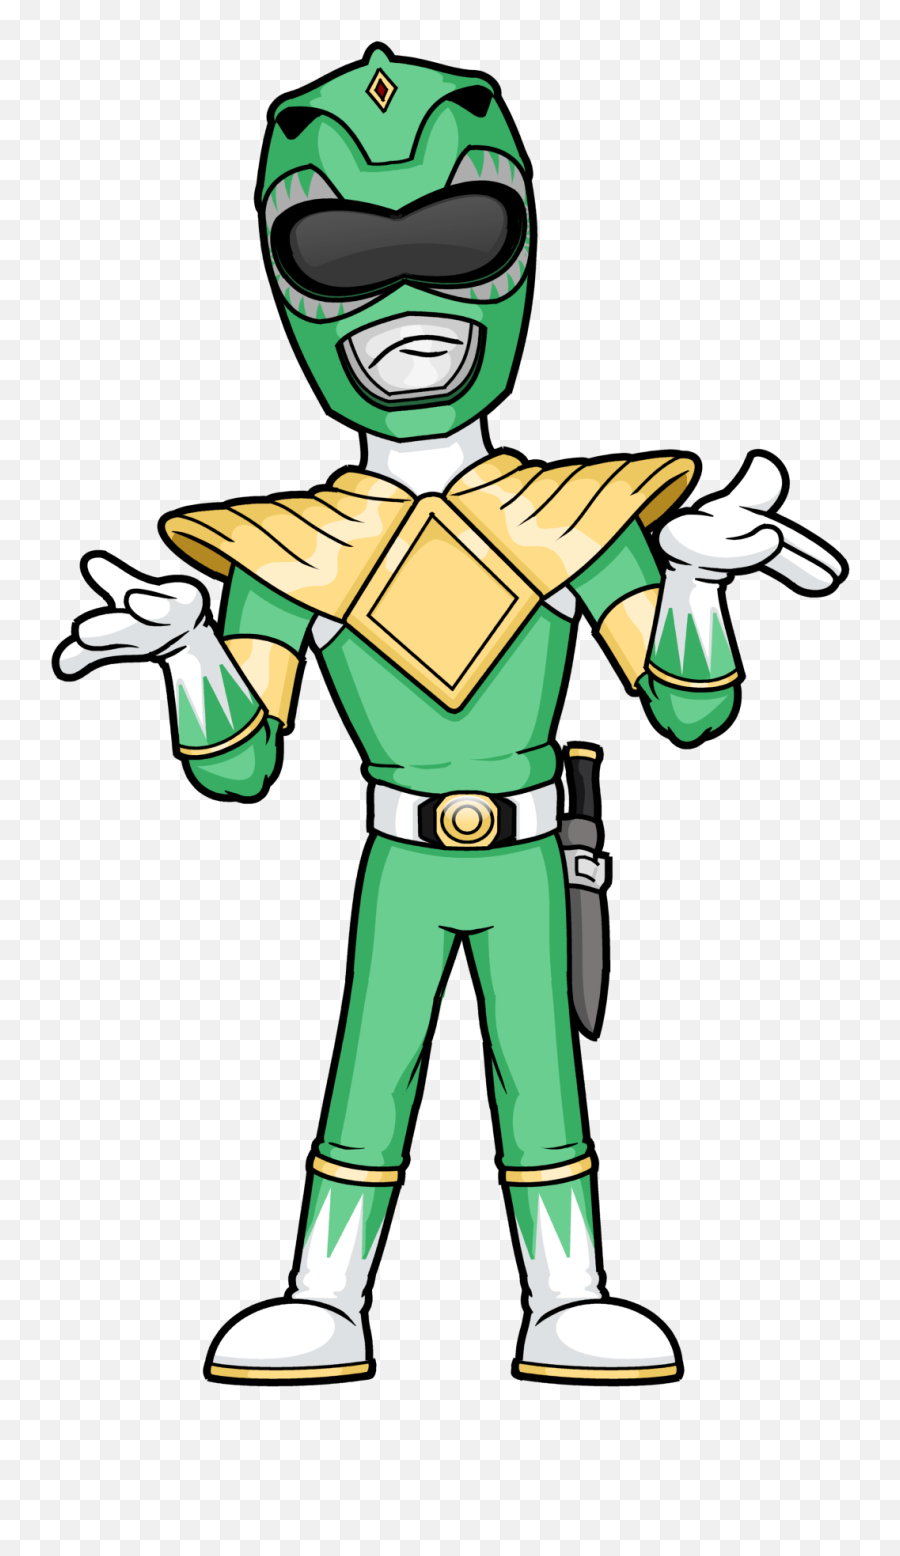 Download Hd The Green Power Ranger - Power Ranger Dibujo Dibujo Animado Power Ranger Png,Power Ranger Png